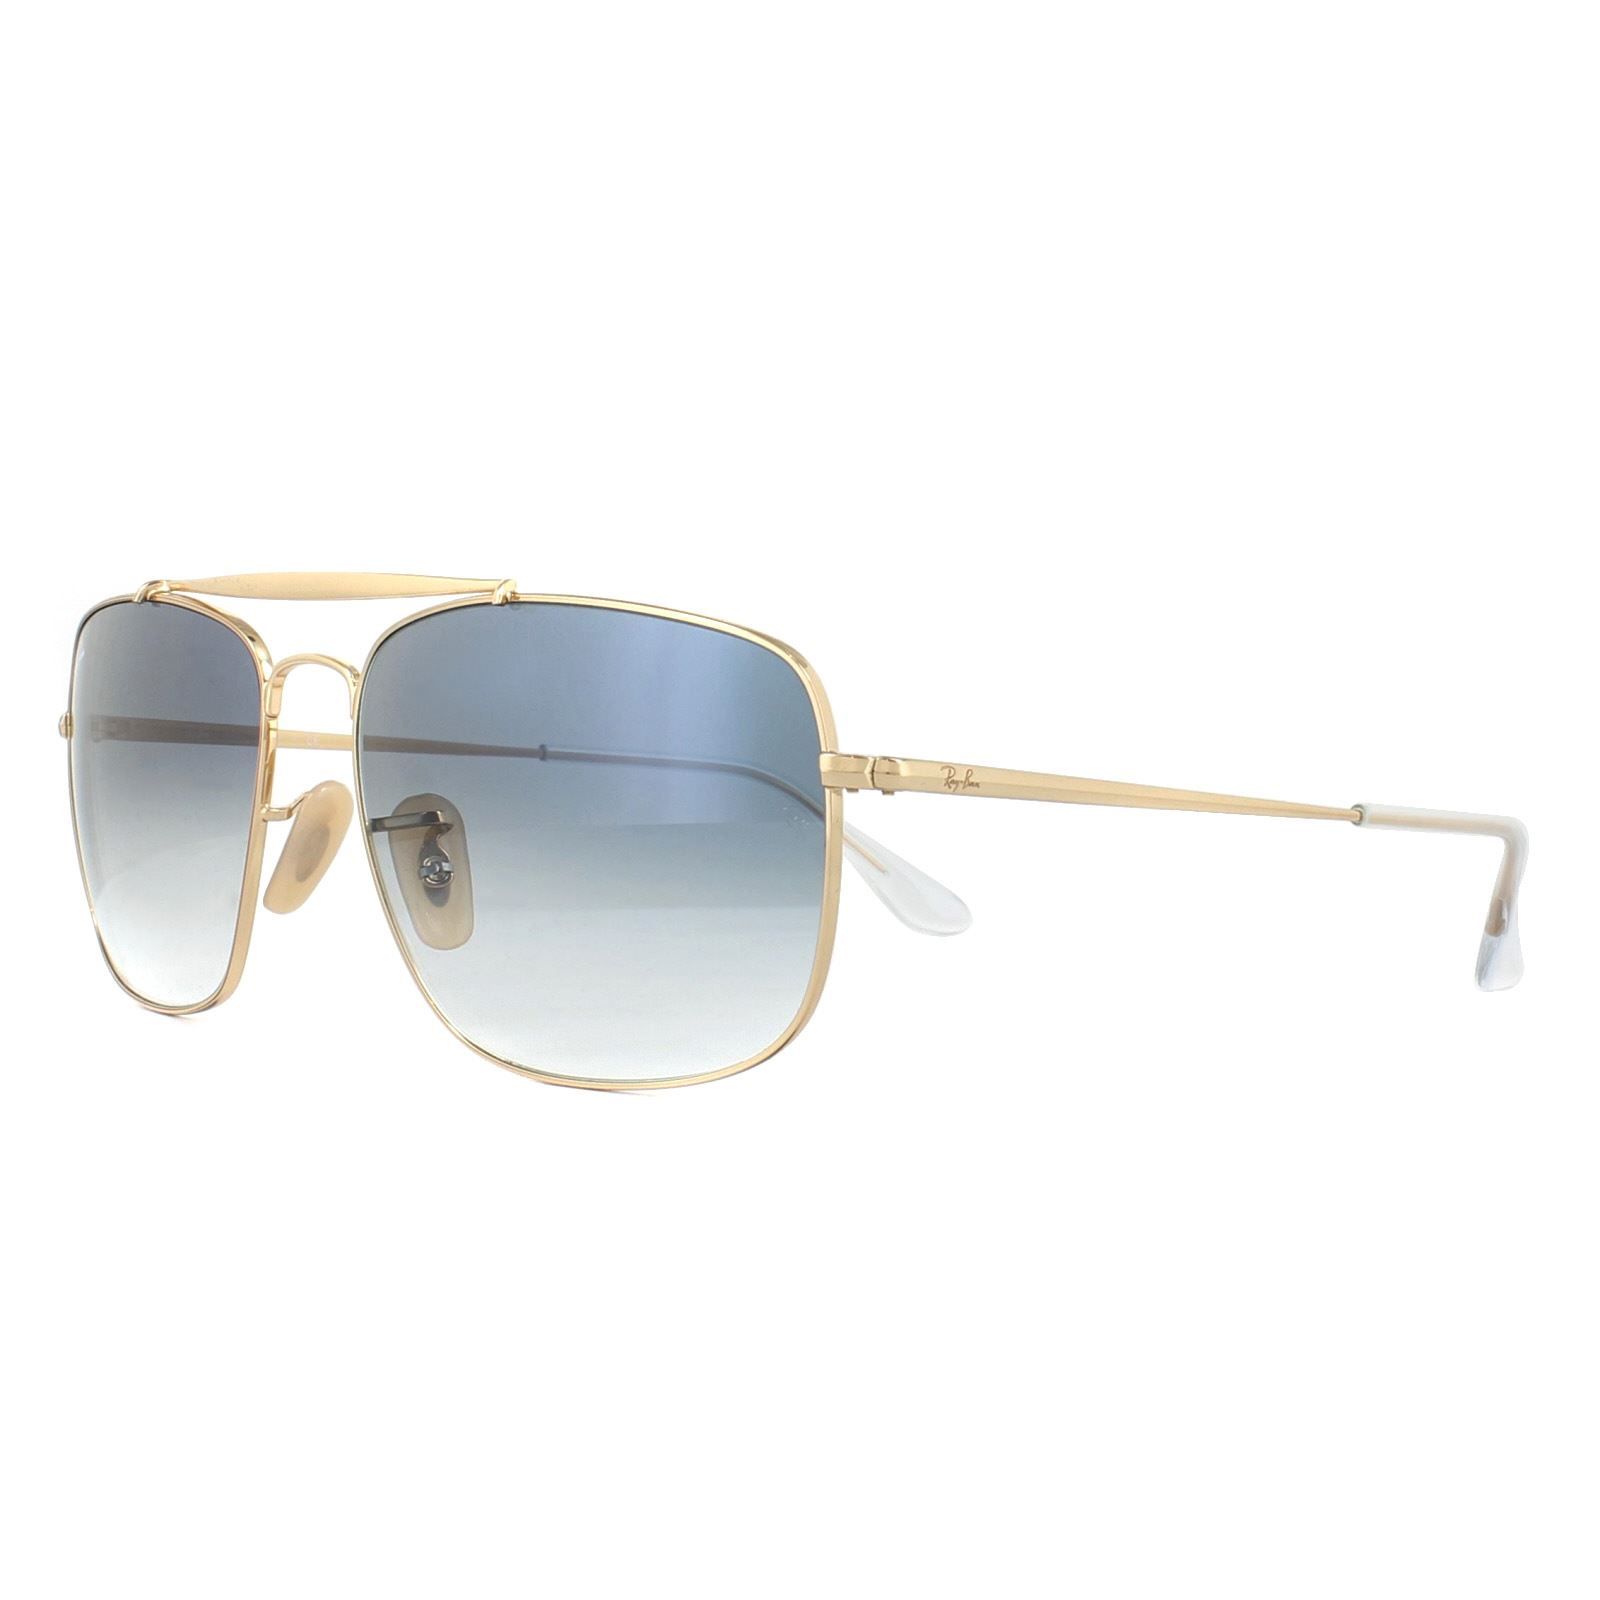 Ray-Ban Sunglasses The Colonel RB3560 001/3F Gold Blue Gradient are a fantastic addition to the aviator collection with this squared off pilot style that features a flat front top brow bar with frontal clips and an otherwise classic look.